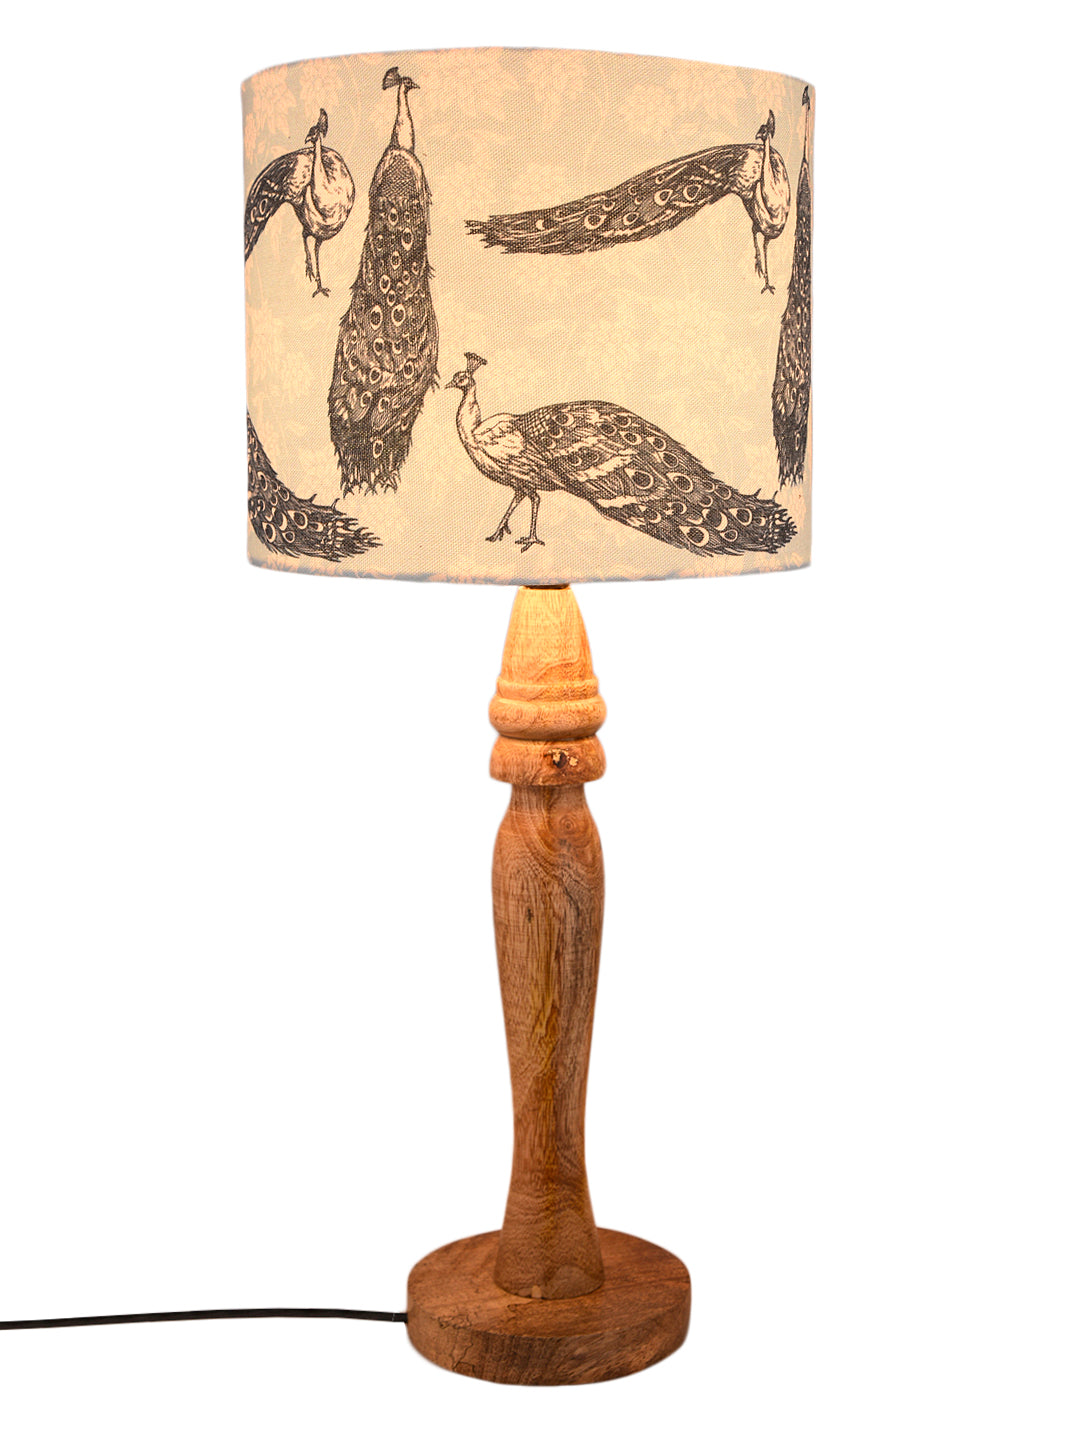 Wooden Round Lamp with Wandering Peacock Lamp Shade